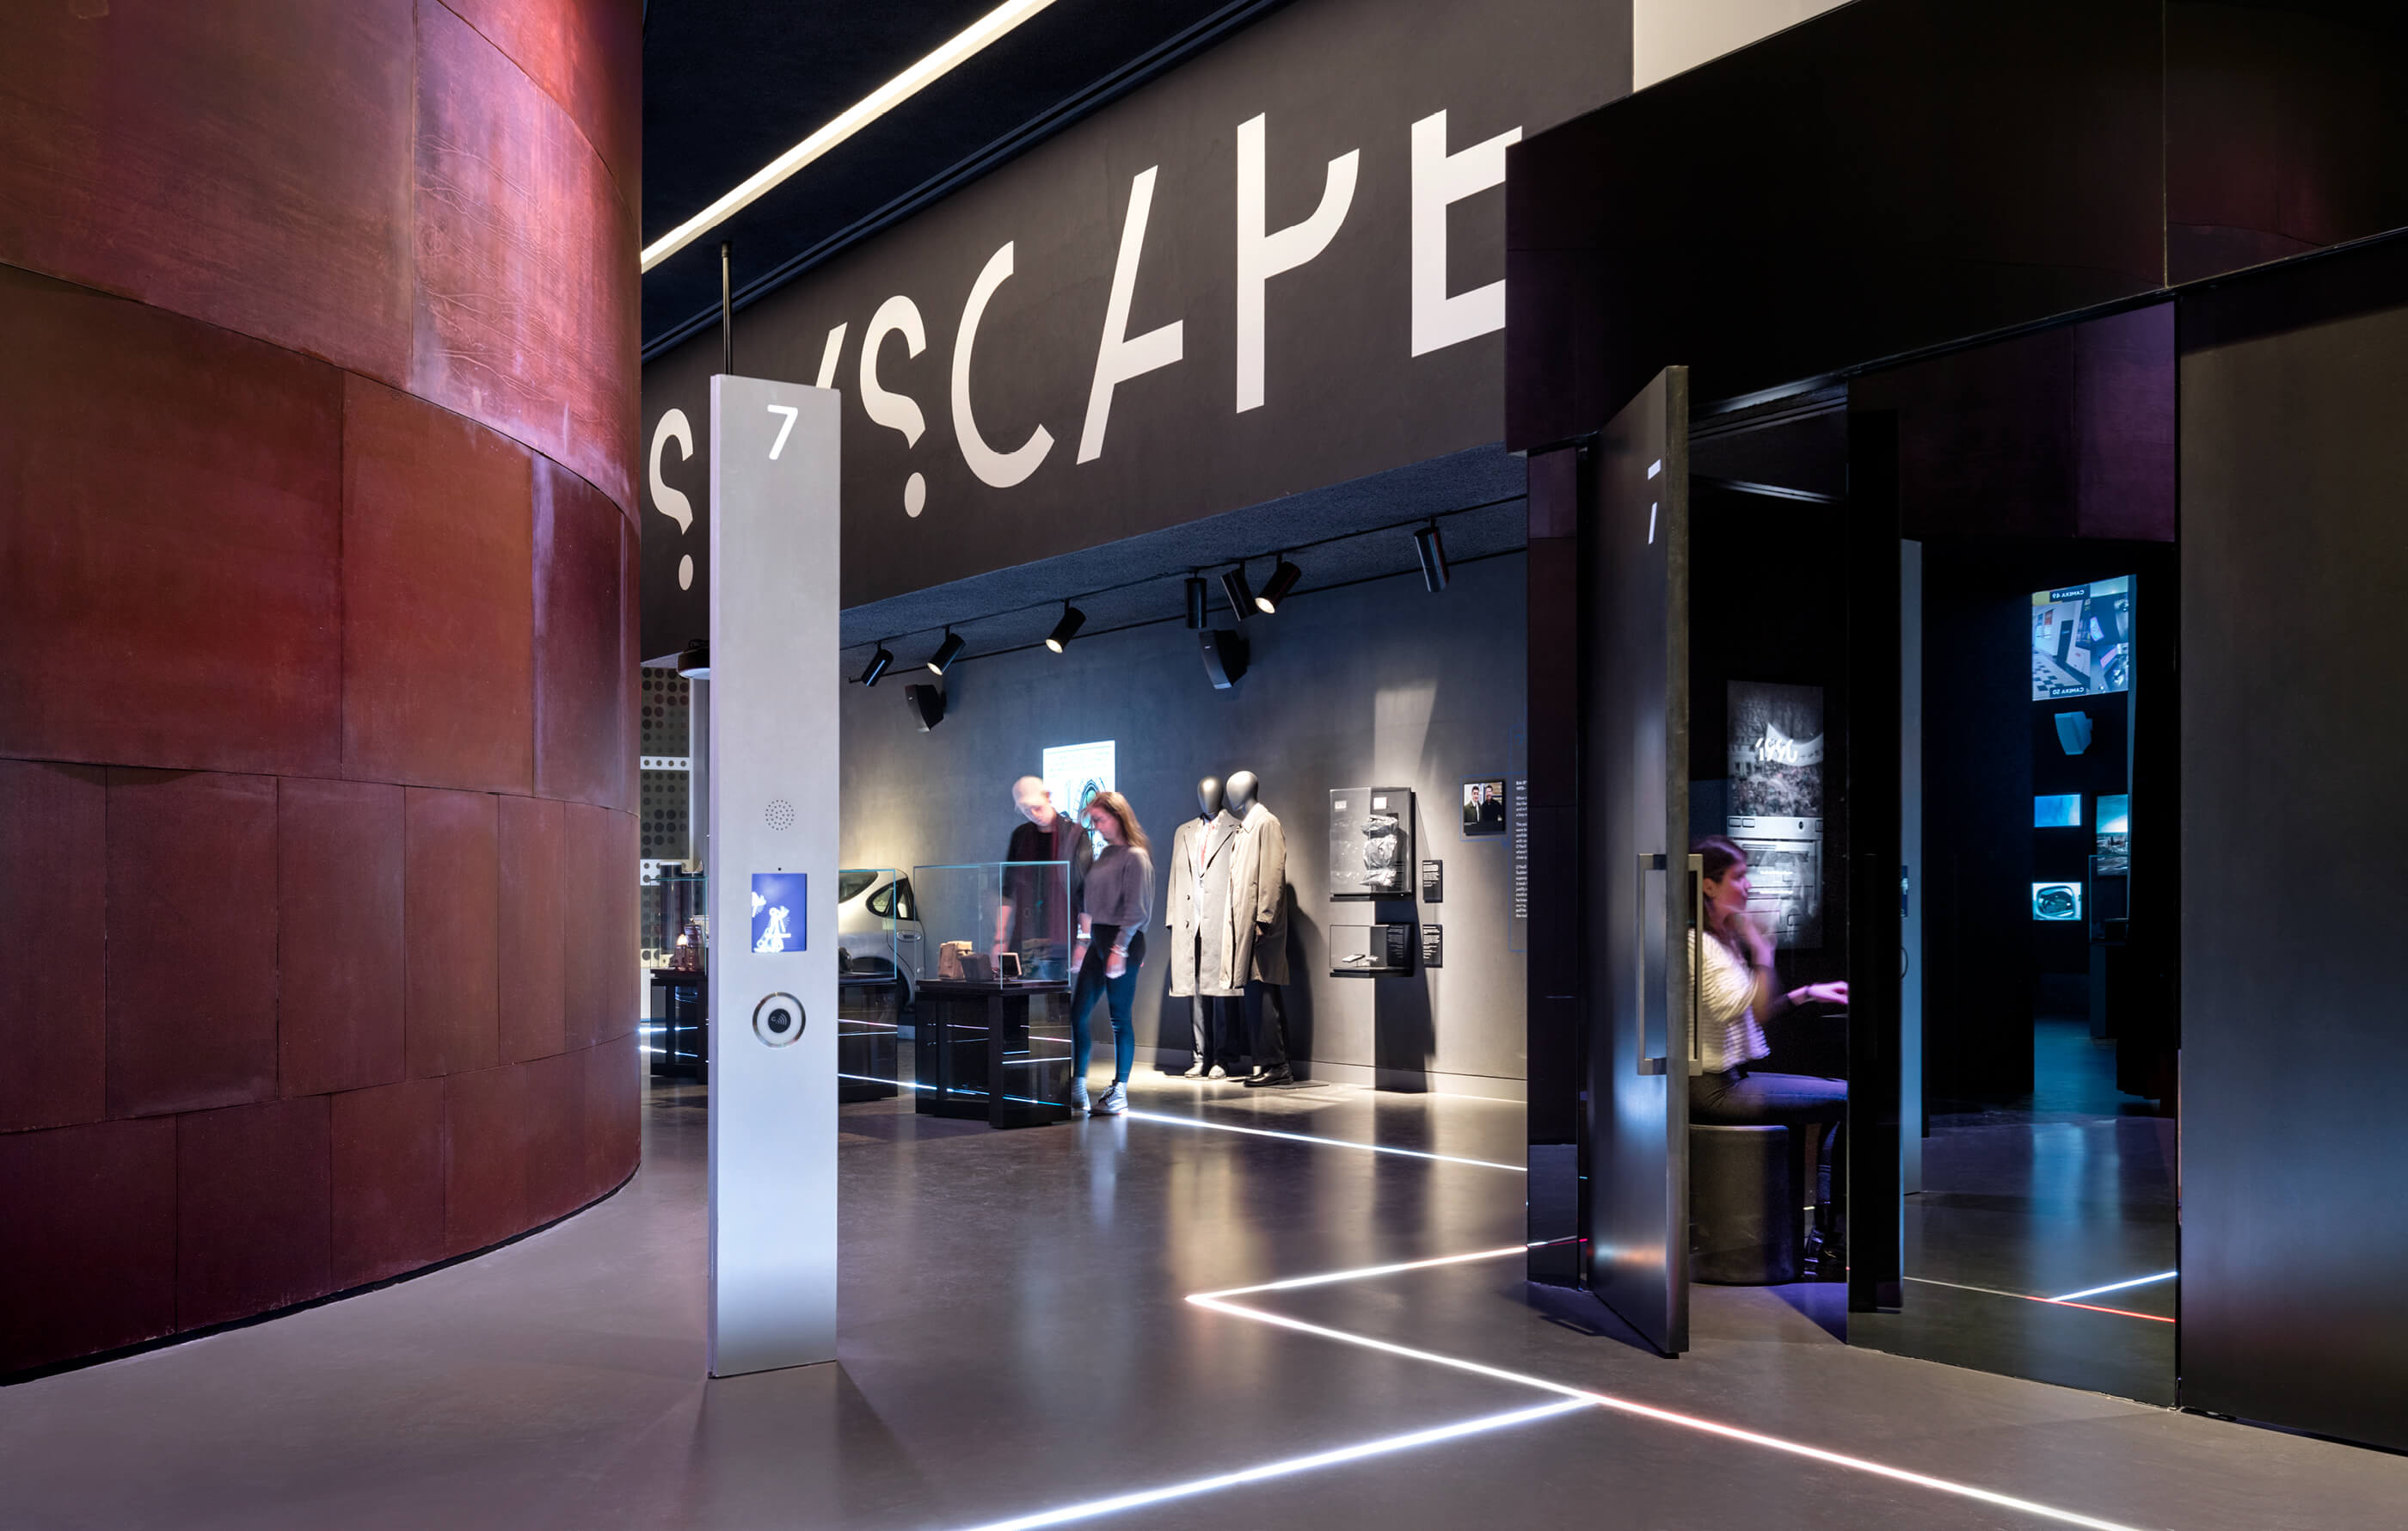 Full screen colour image of the Spyscape museum, designed in cool grey hues with polished concrete floors, black cabinets and white, illuminated walkway strips of light